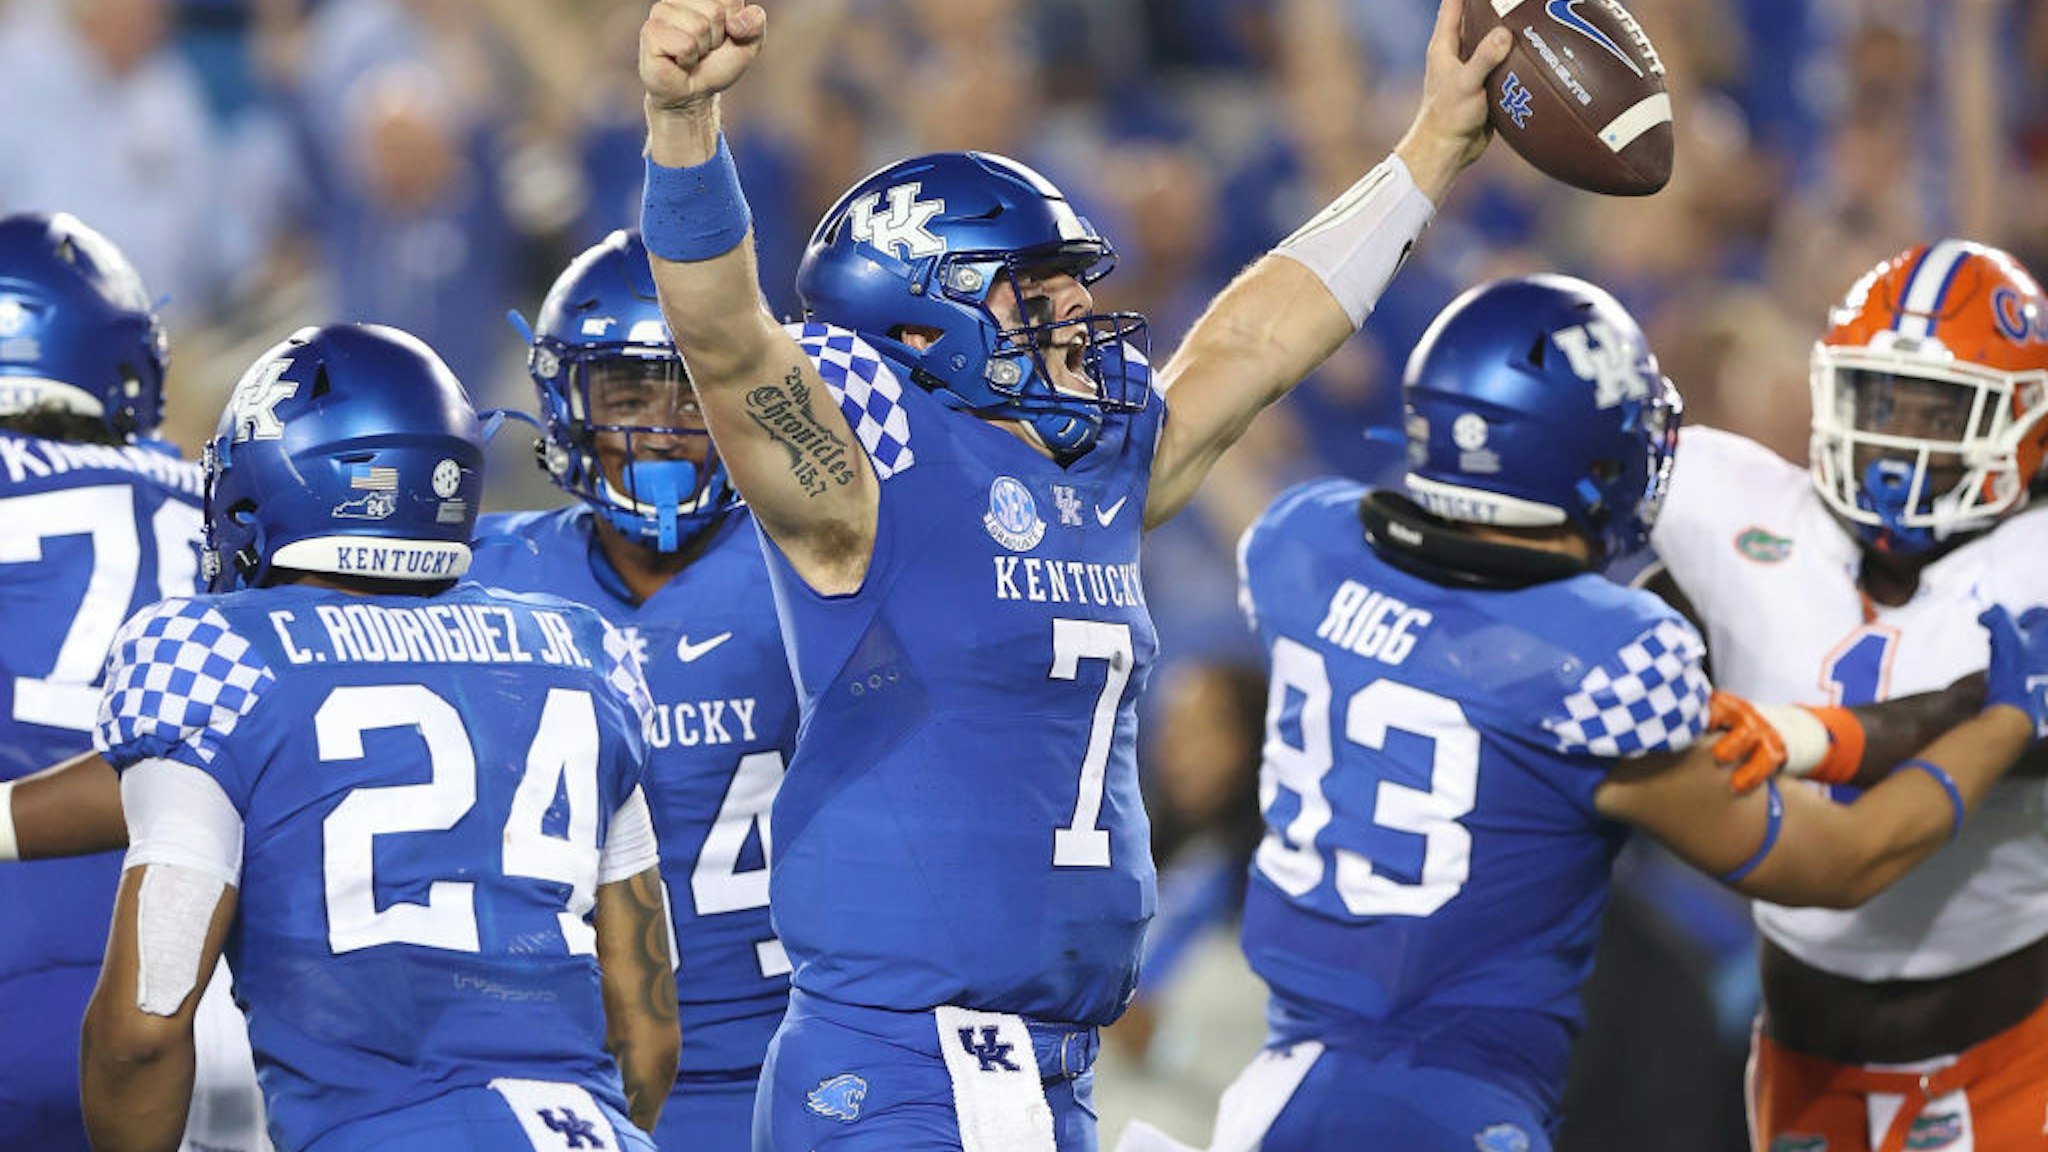 LEXINGTON, KENTUCKY - OCTOBER 02: Will Levis #7 of the Kentucky Wildcats celebrates after the 20-13 win against the Florida Gators at Kroger Field on October 02, 2021 in Lexington, Kentucky. (Photo by Andy Lyons/Getty Images)